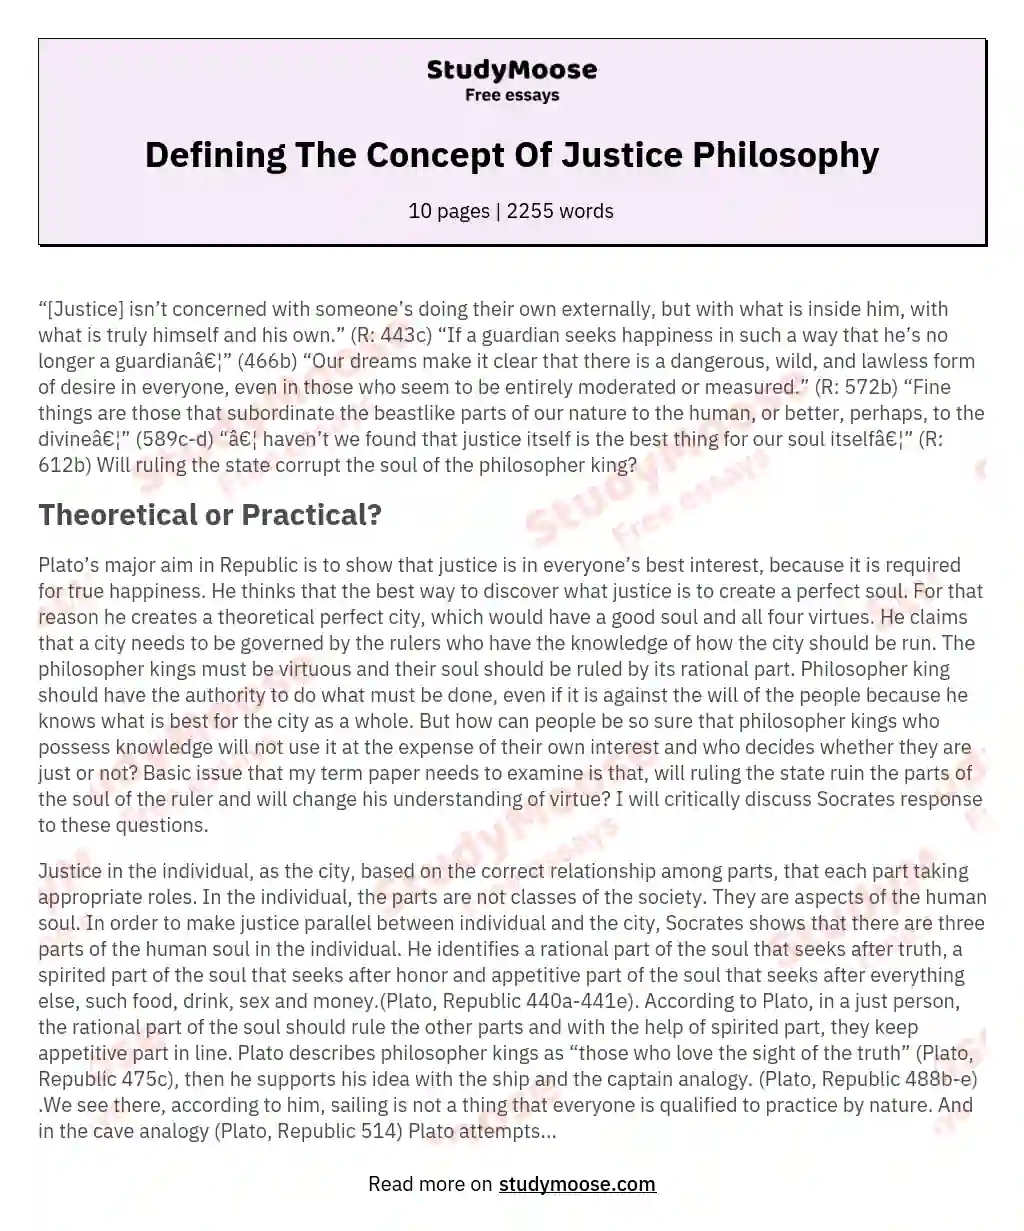 Defining The Concept Of Justice Philosophy essay